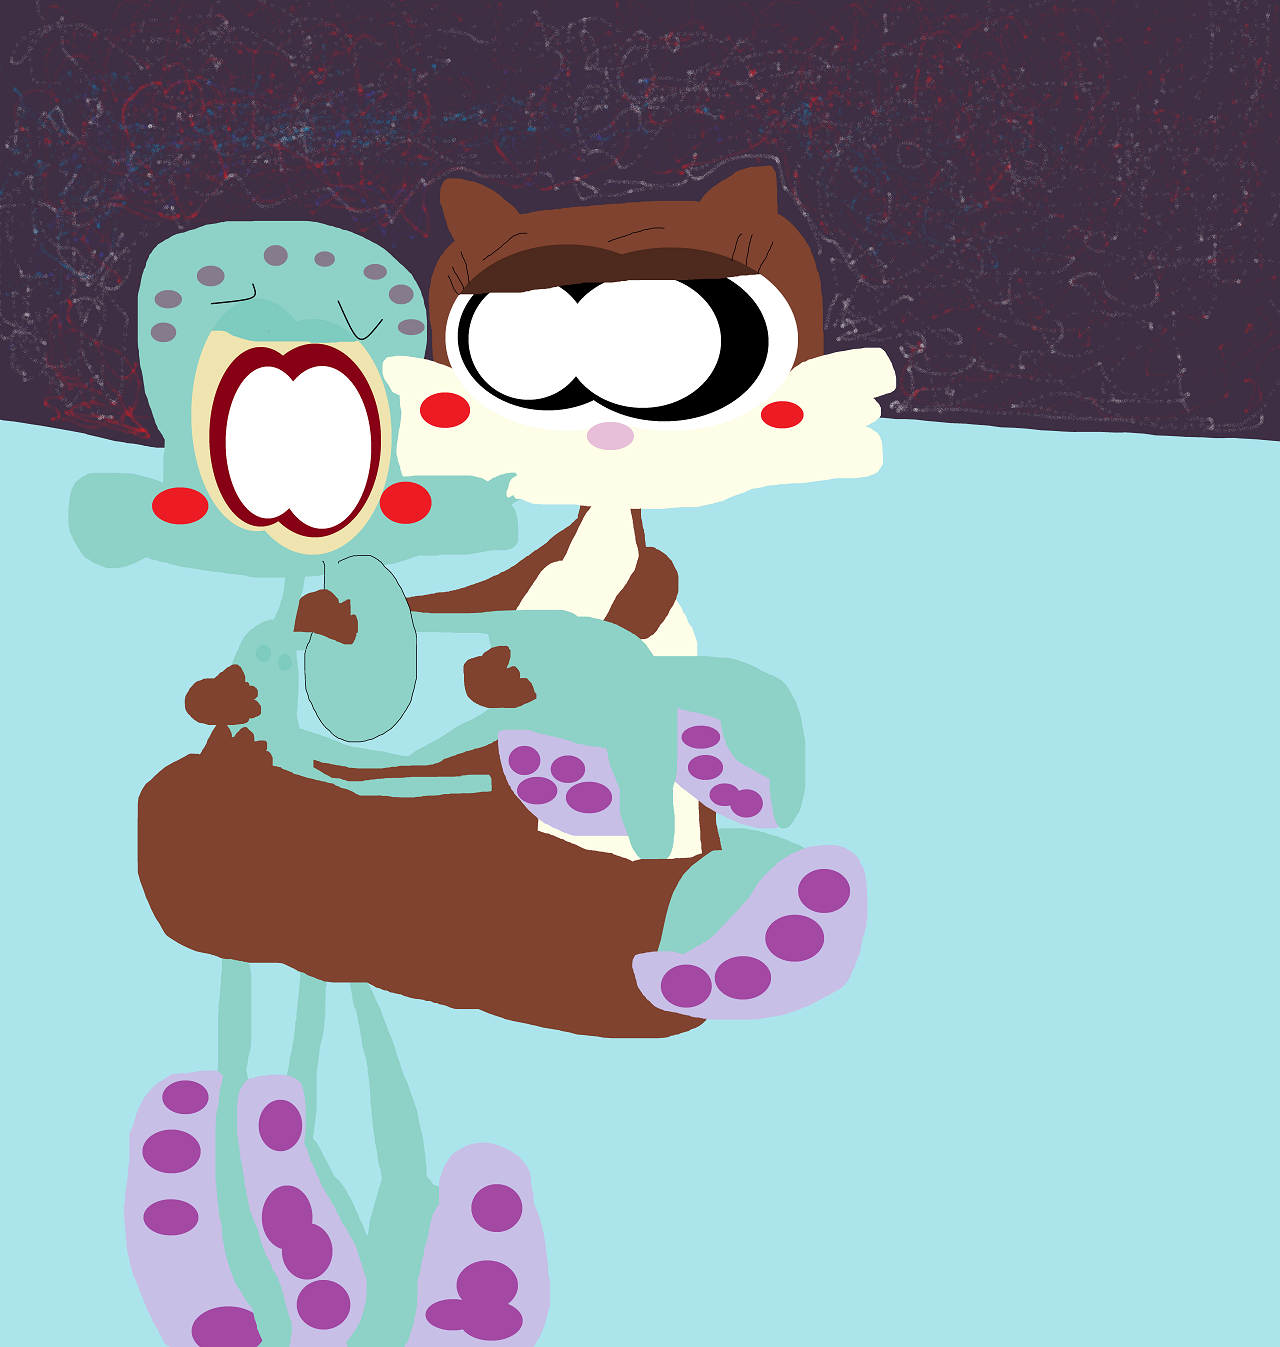 Squidward And Sandy Skinny Dipping And Kissing During Fireworks by Falconlobo